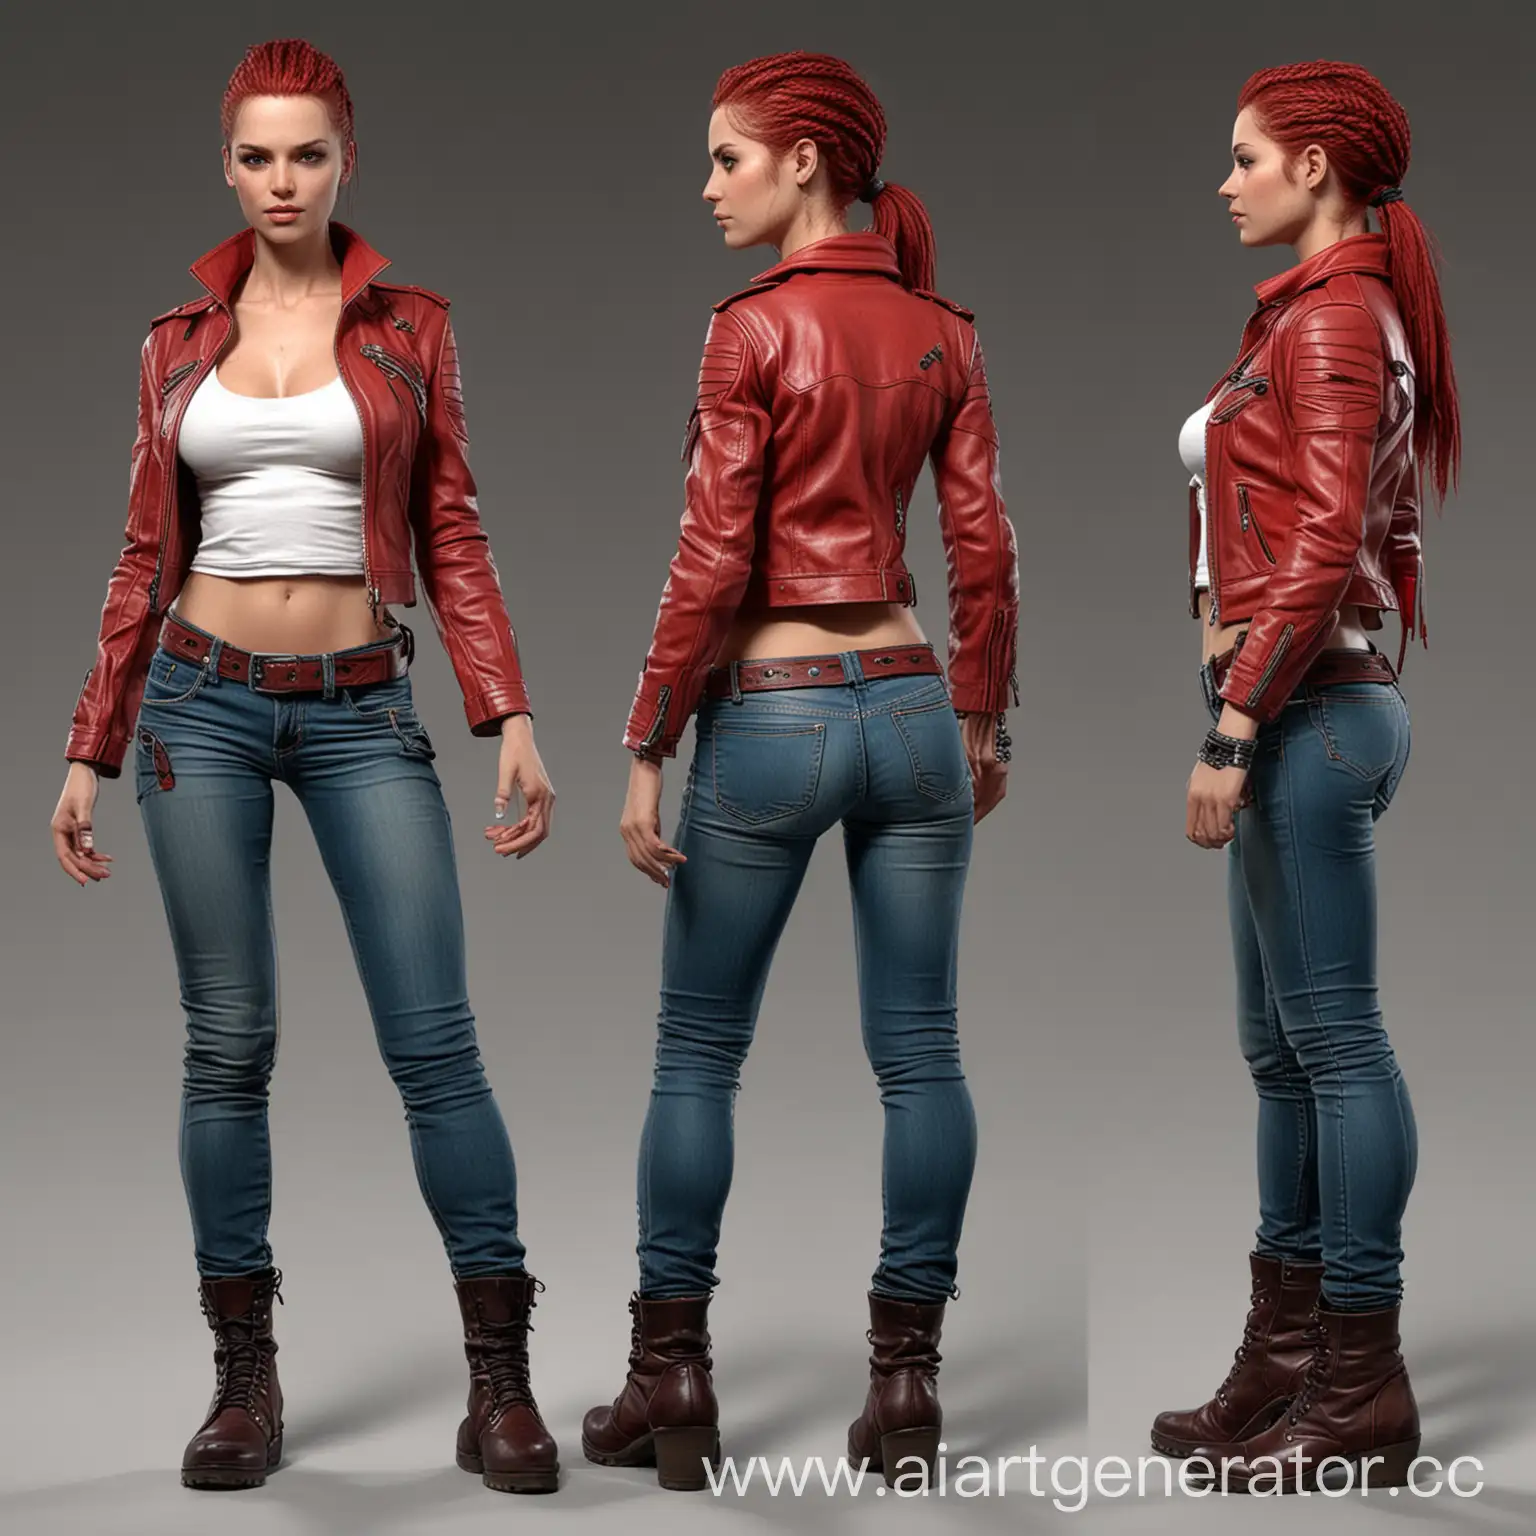 Female turnaround 4 poses front, back, side, 3/4, Lottie a beautiful, perfect face, black medium short hair with bright red braids' tips, in jeans, white tank top and red leather jacket, no shoes. By Carlos Ezquerra, Dave Gibbons, dynamic lighting, comic art, winning award masterpiece, fantastically beautiful, illustration, aesthetically inspired by Cam Kennedy and Simon Bisley, 2000ad comic